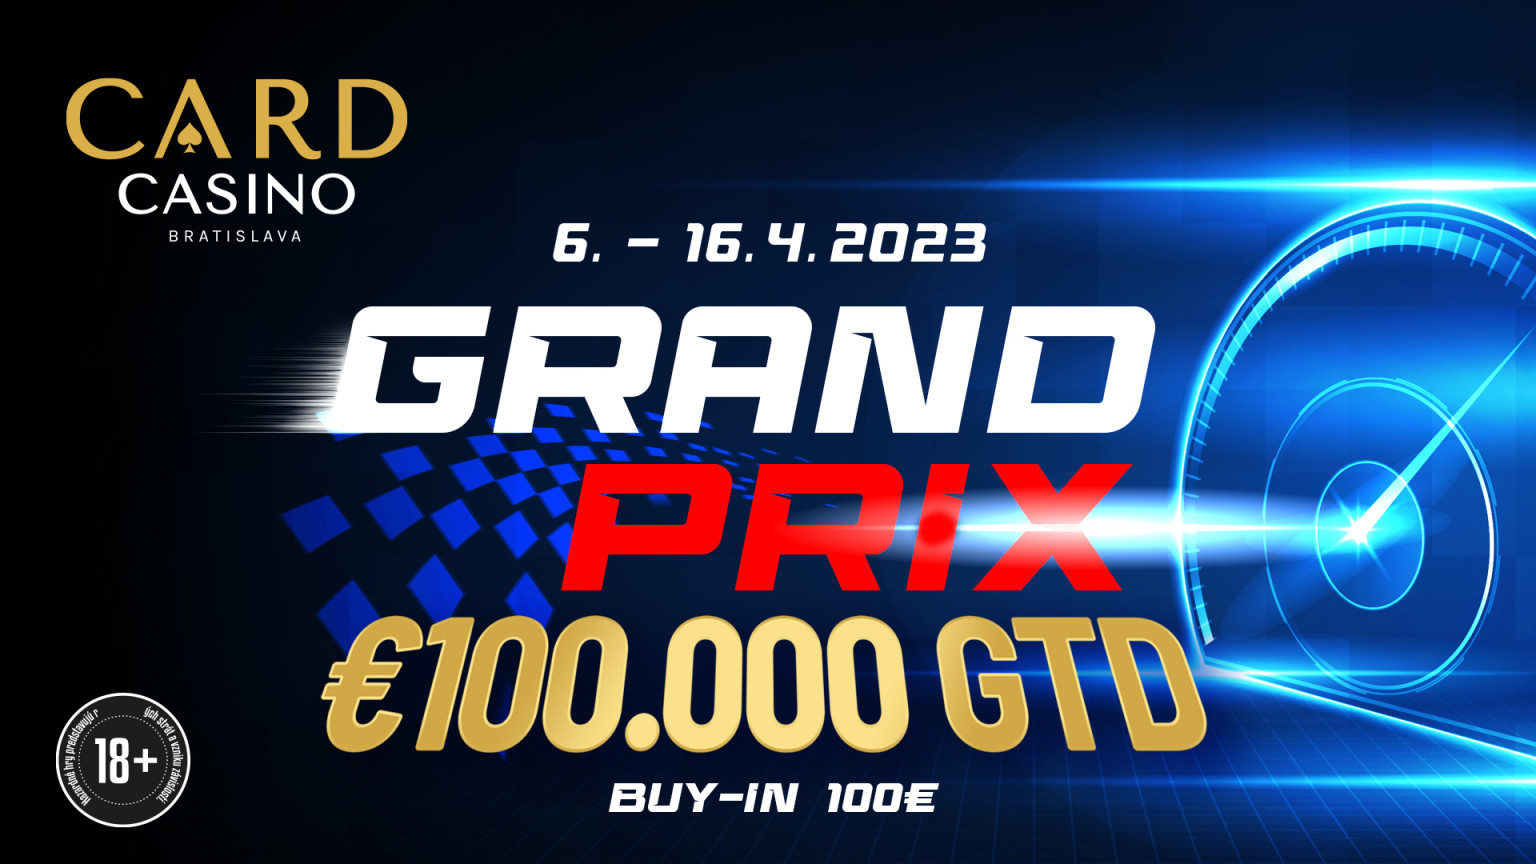 The €100,000 GTD Grand Prix gets underway after Easter